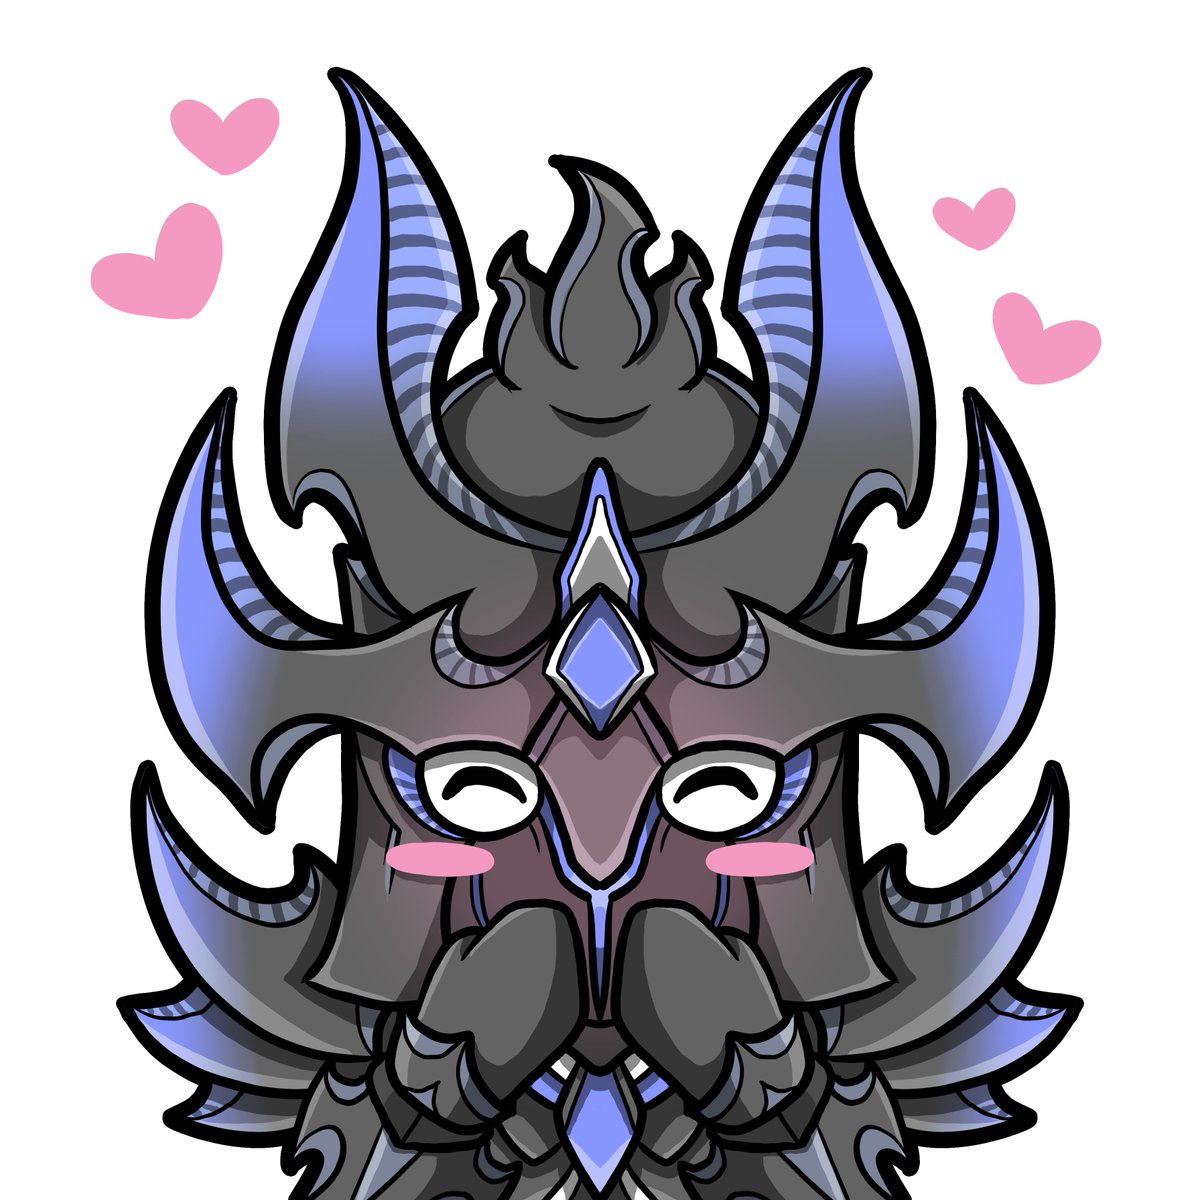 My entry for the 2nd lost ark Emote Comp.
ThaemineBlush
just look at him being all cute before he ruins your day
#LostArk #FanArk @playlostark